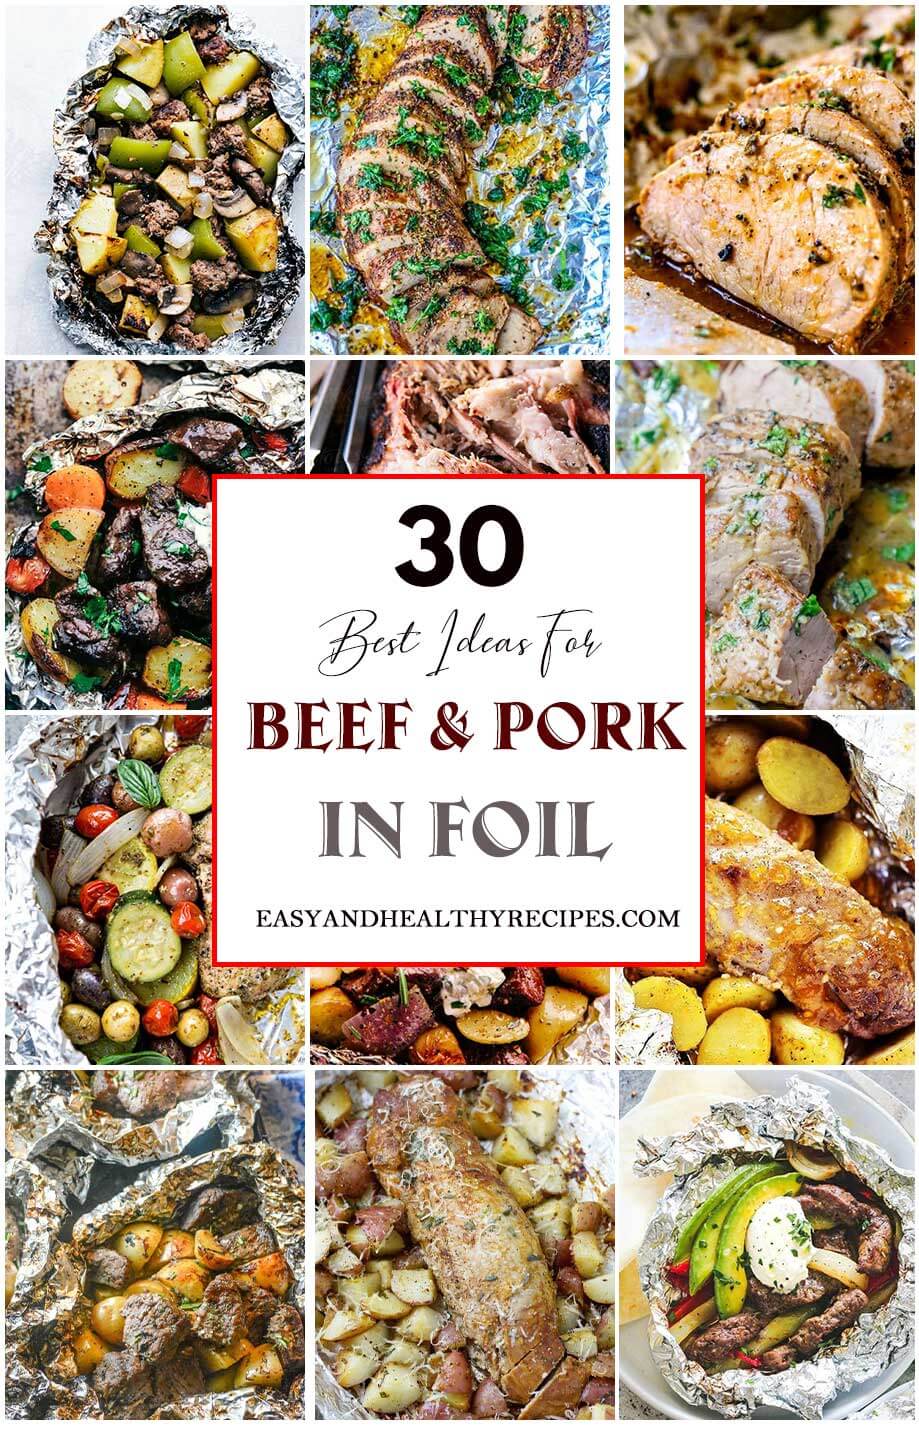 20 Amazing Ideas For Beef and Pork Foil Packs